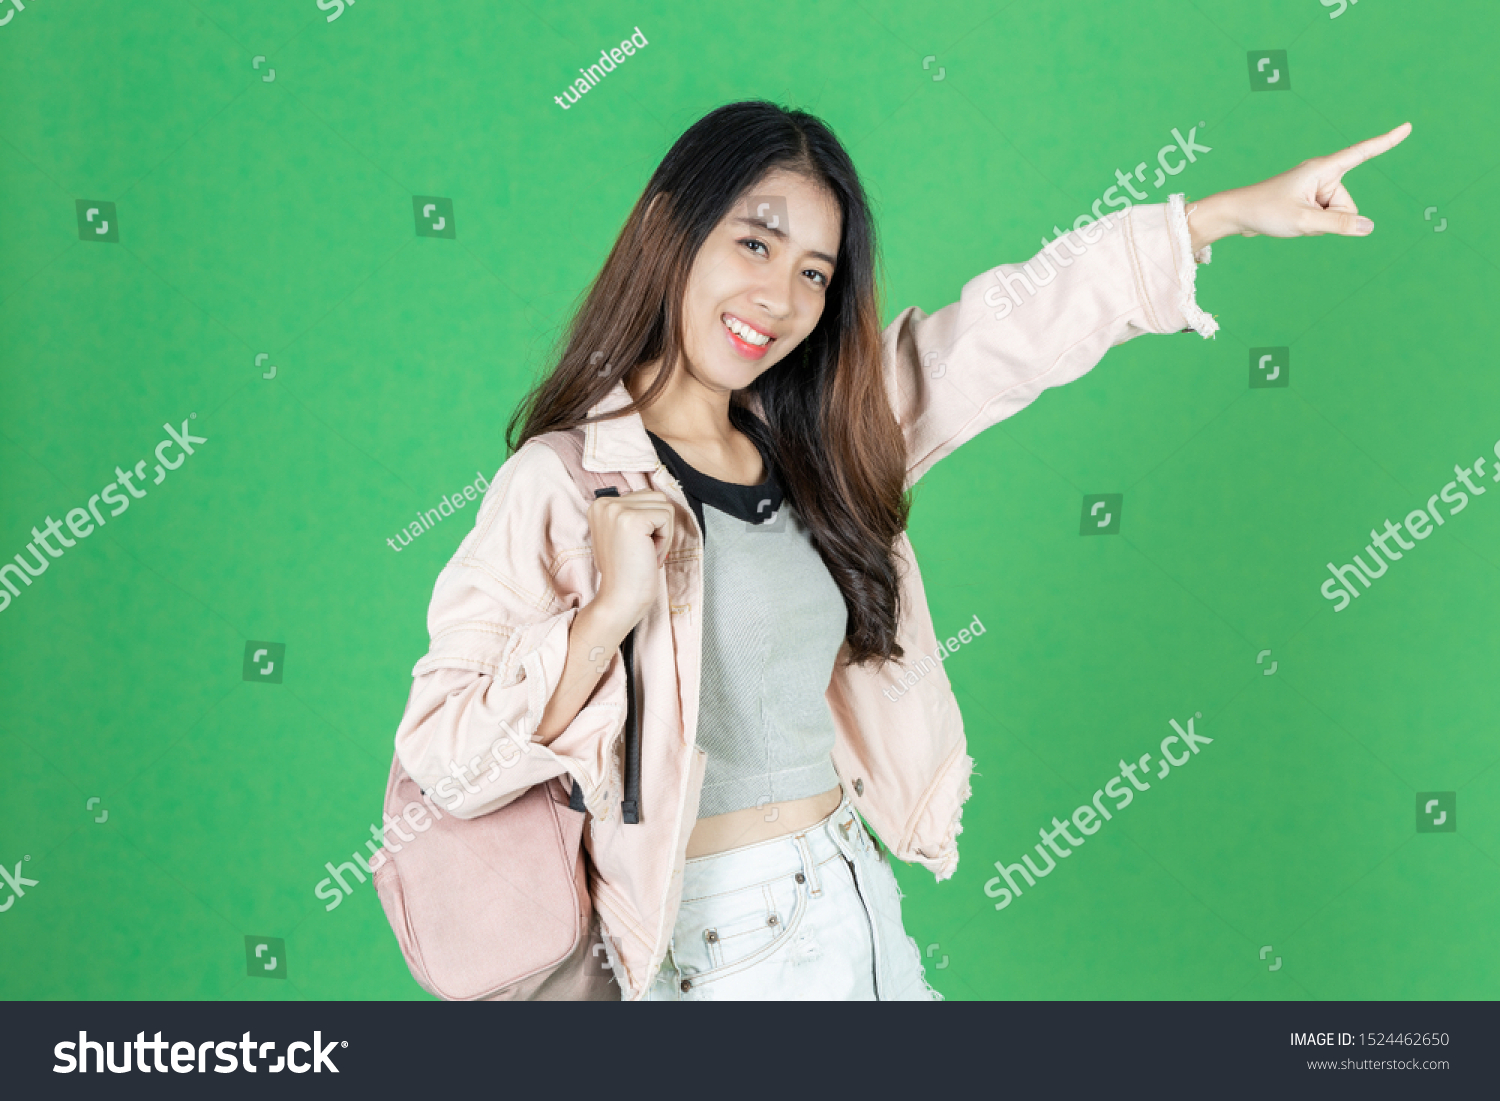 Attractive young Asian tourist girl with bag ready to travel over green isolated background. #1524462650